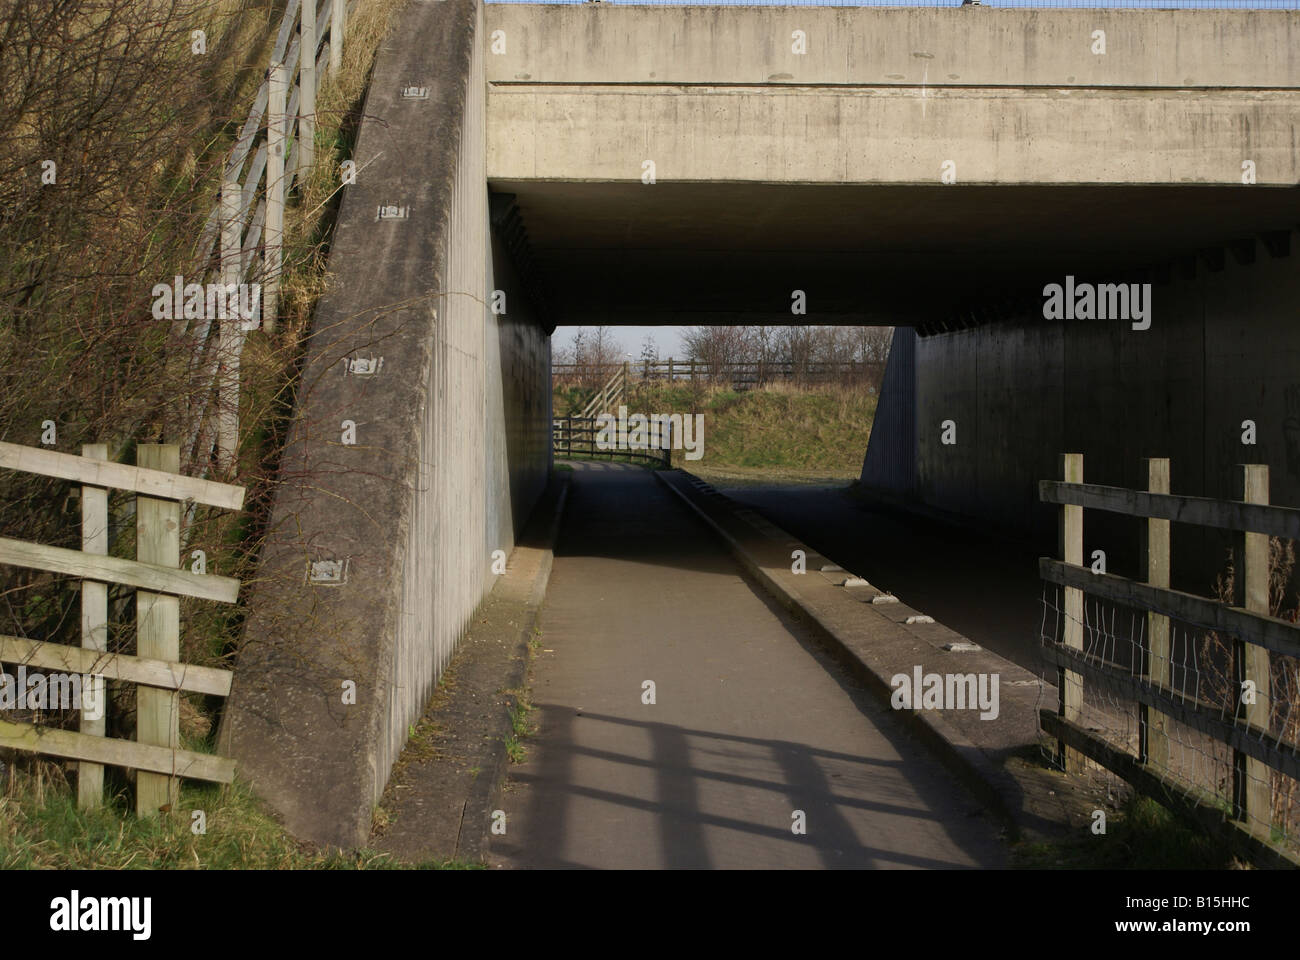 A50 underpass at Chellaston Derby Derbyshire England February 2007 Stock Photo